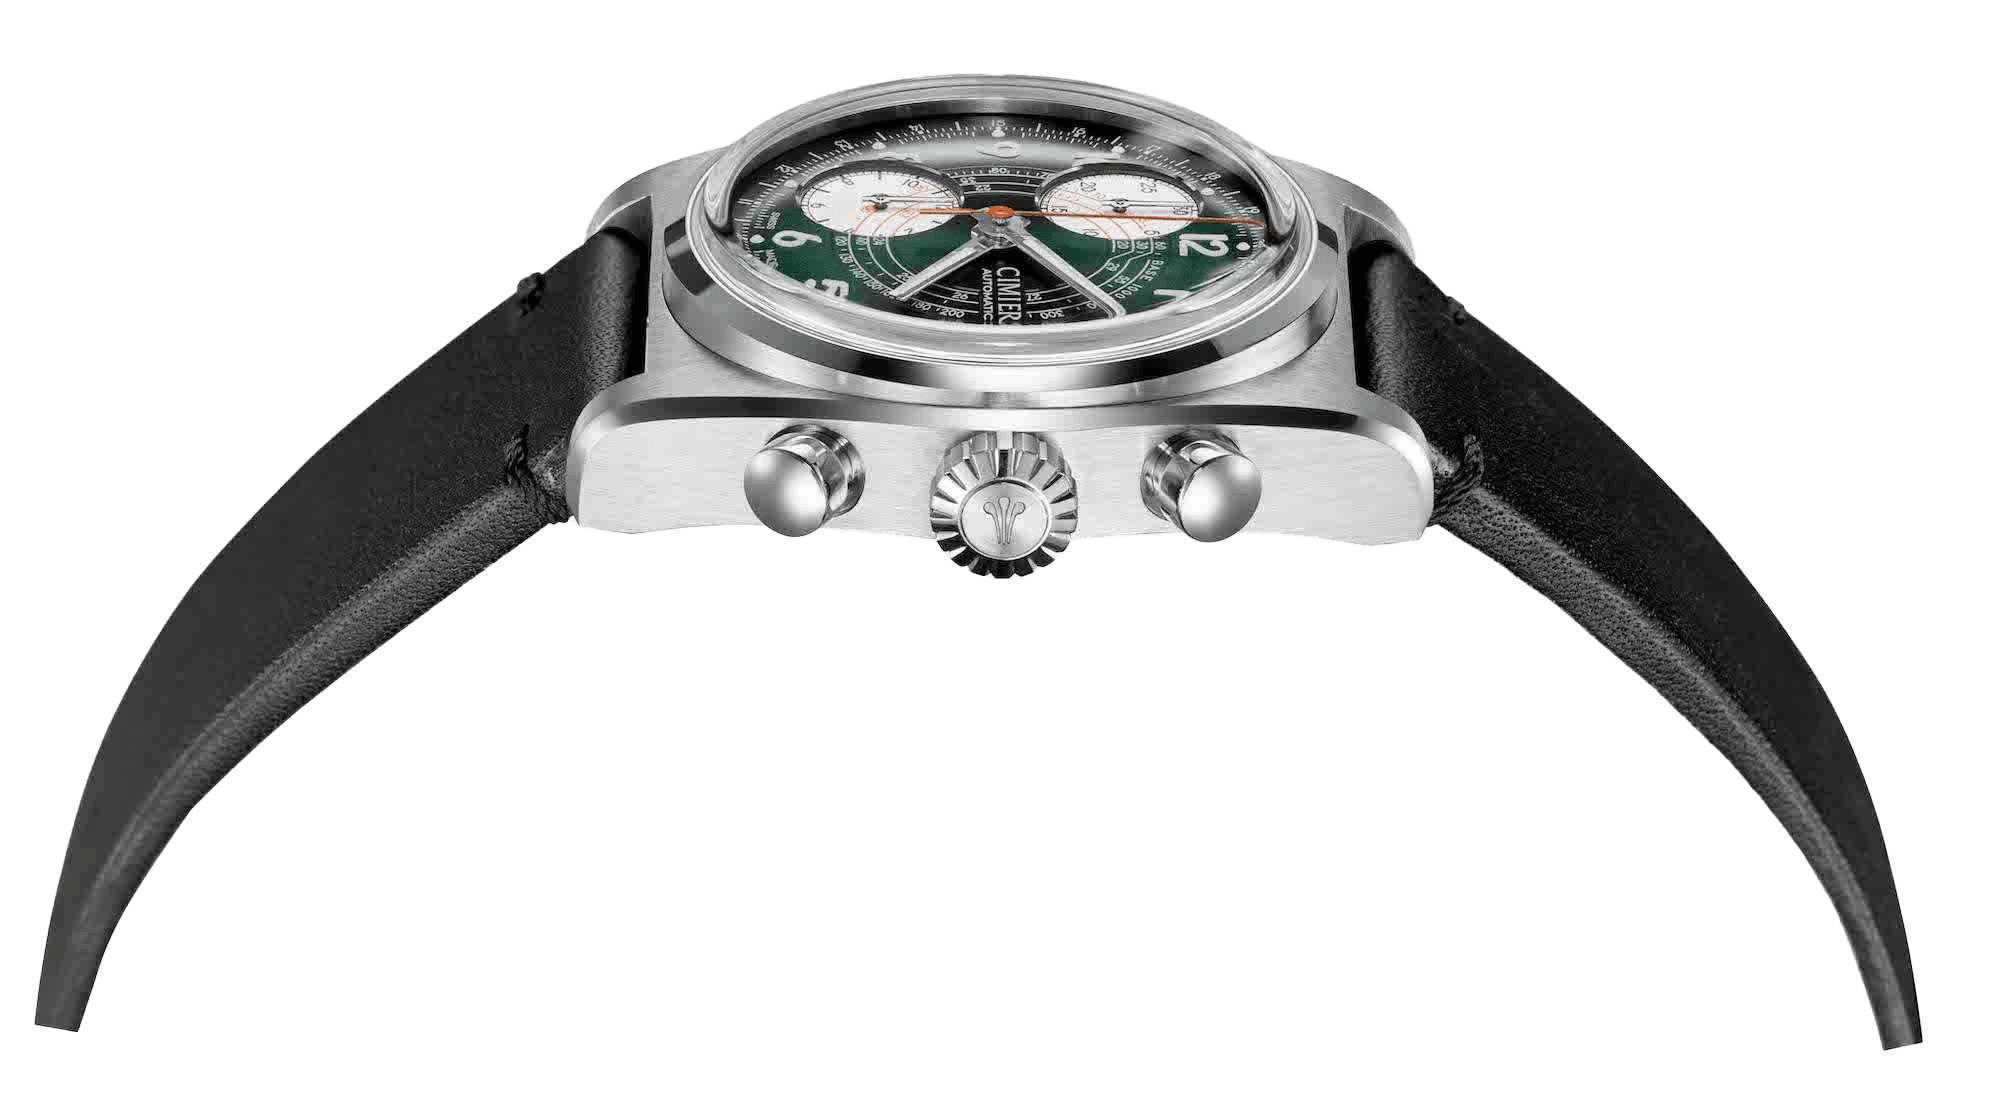 Profile of Cimier 711 Heritage Chronograph wristwatch with green dial